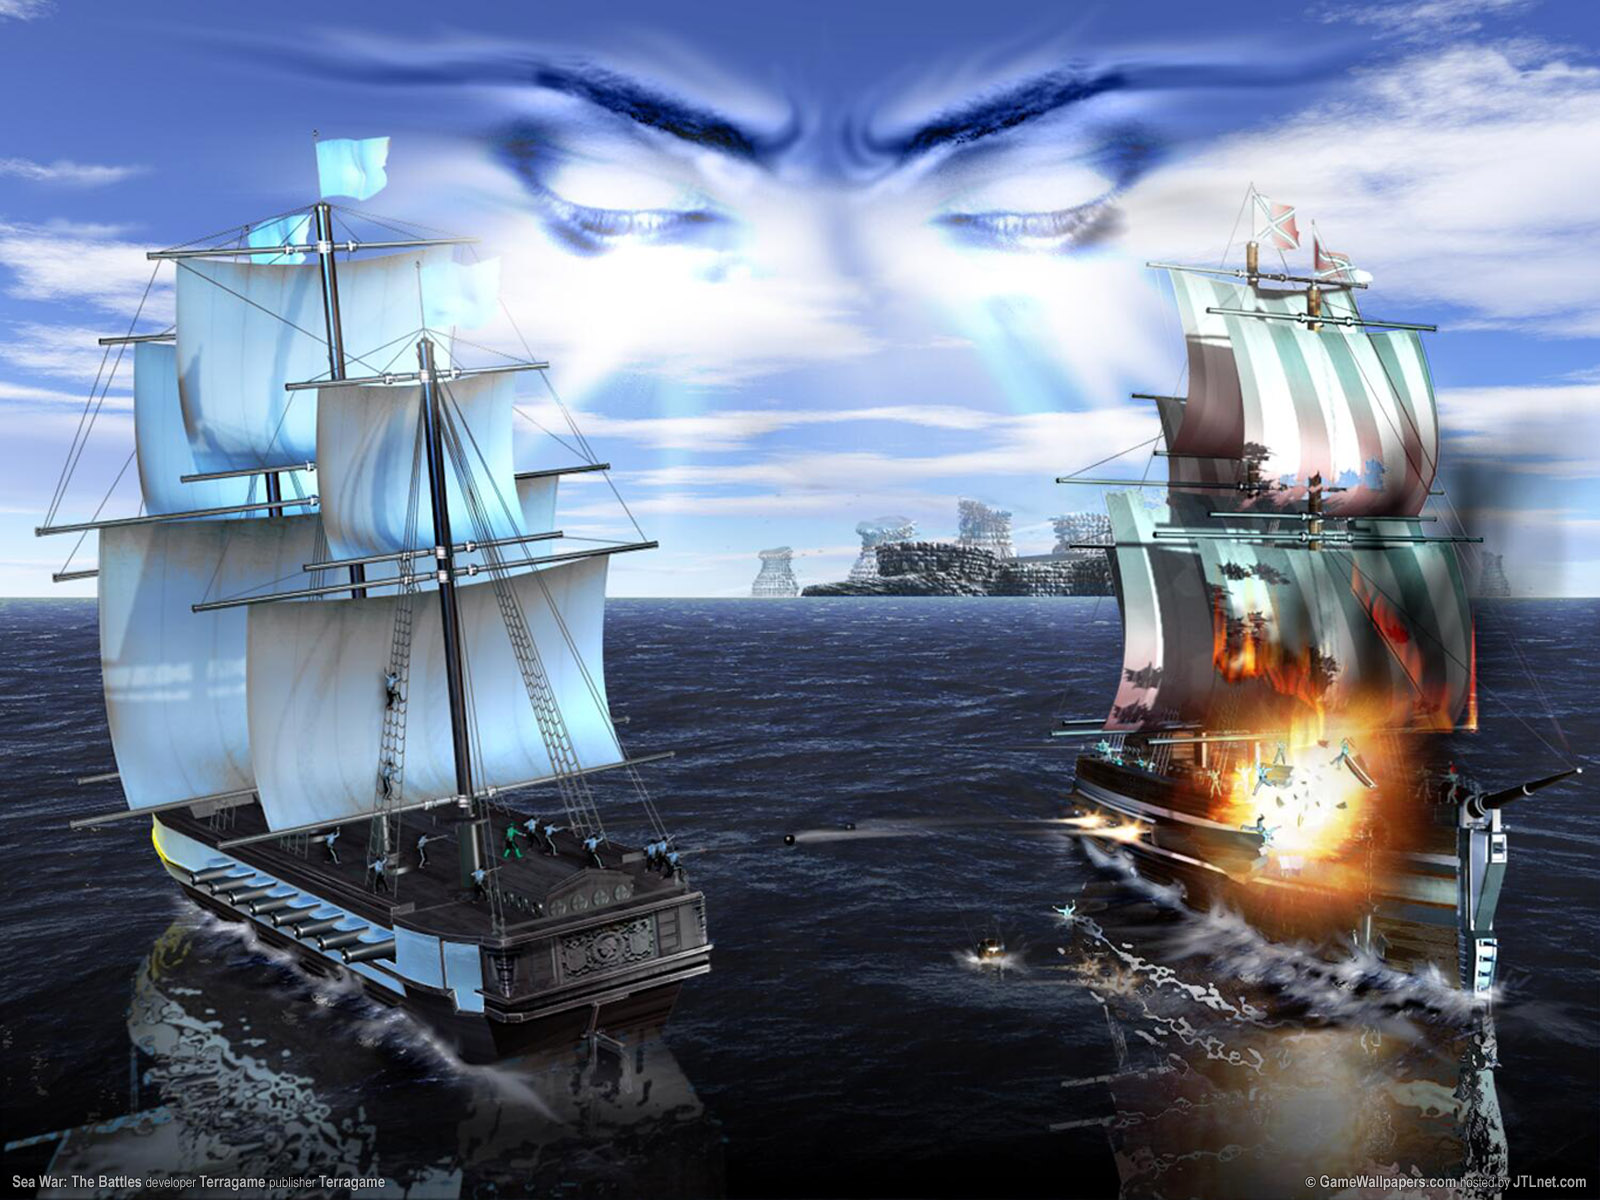 Sea Wars Online for iphone download